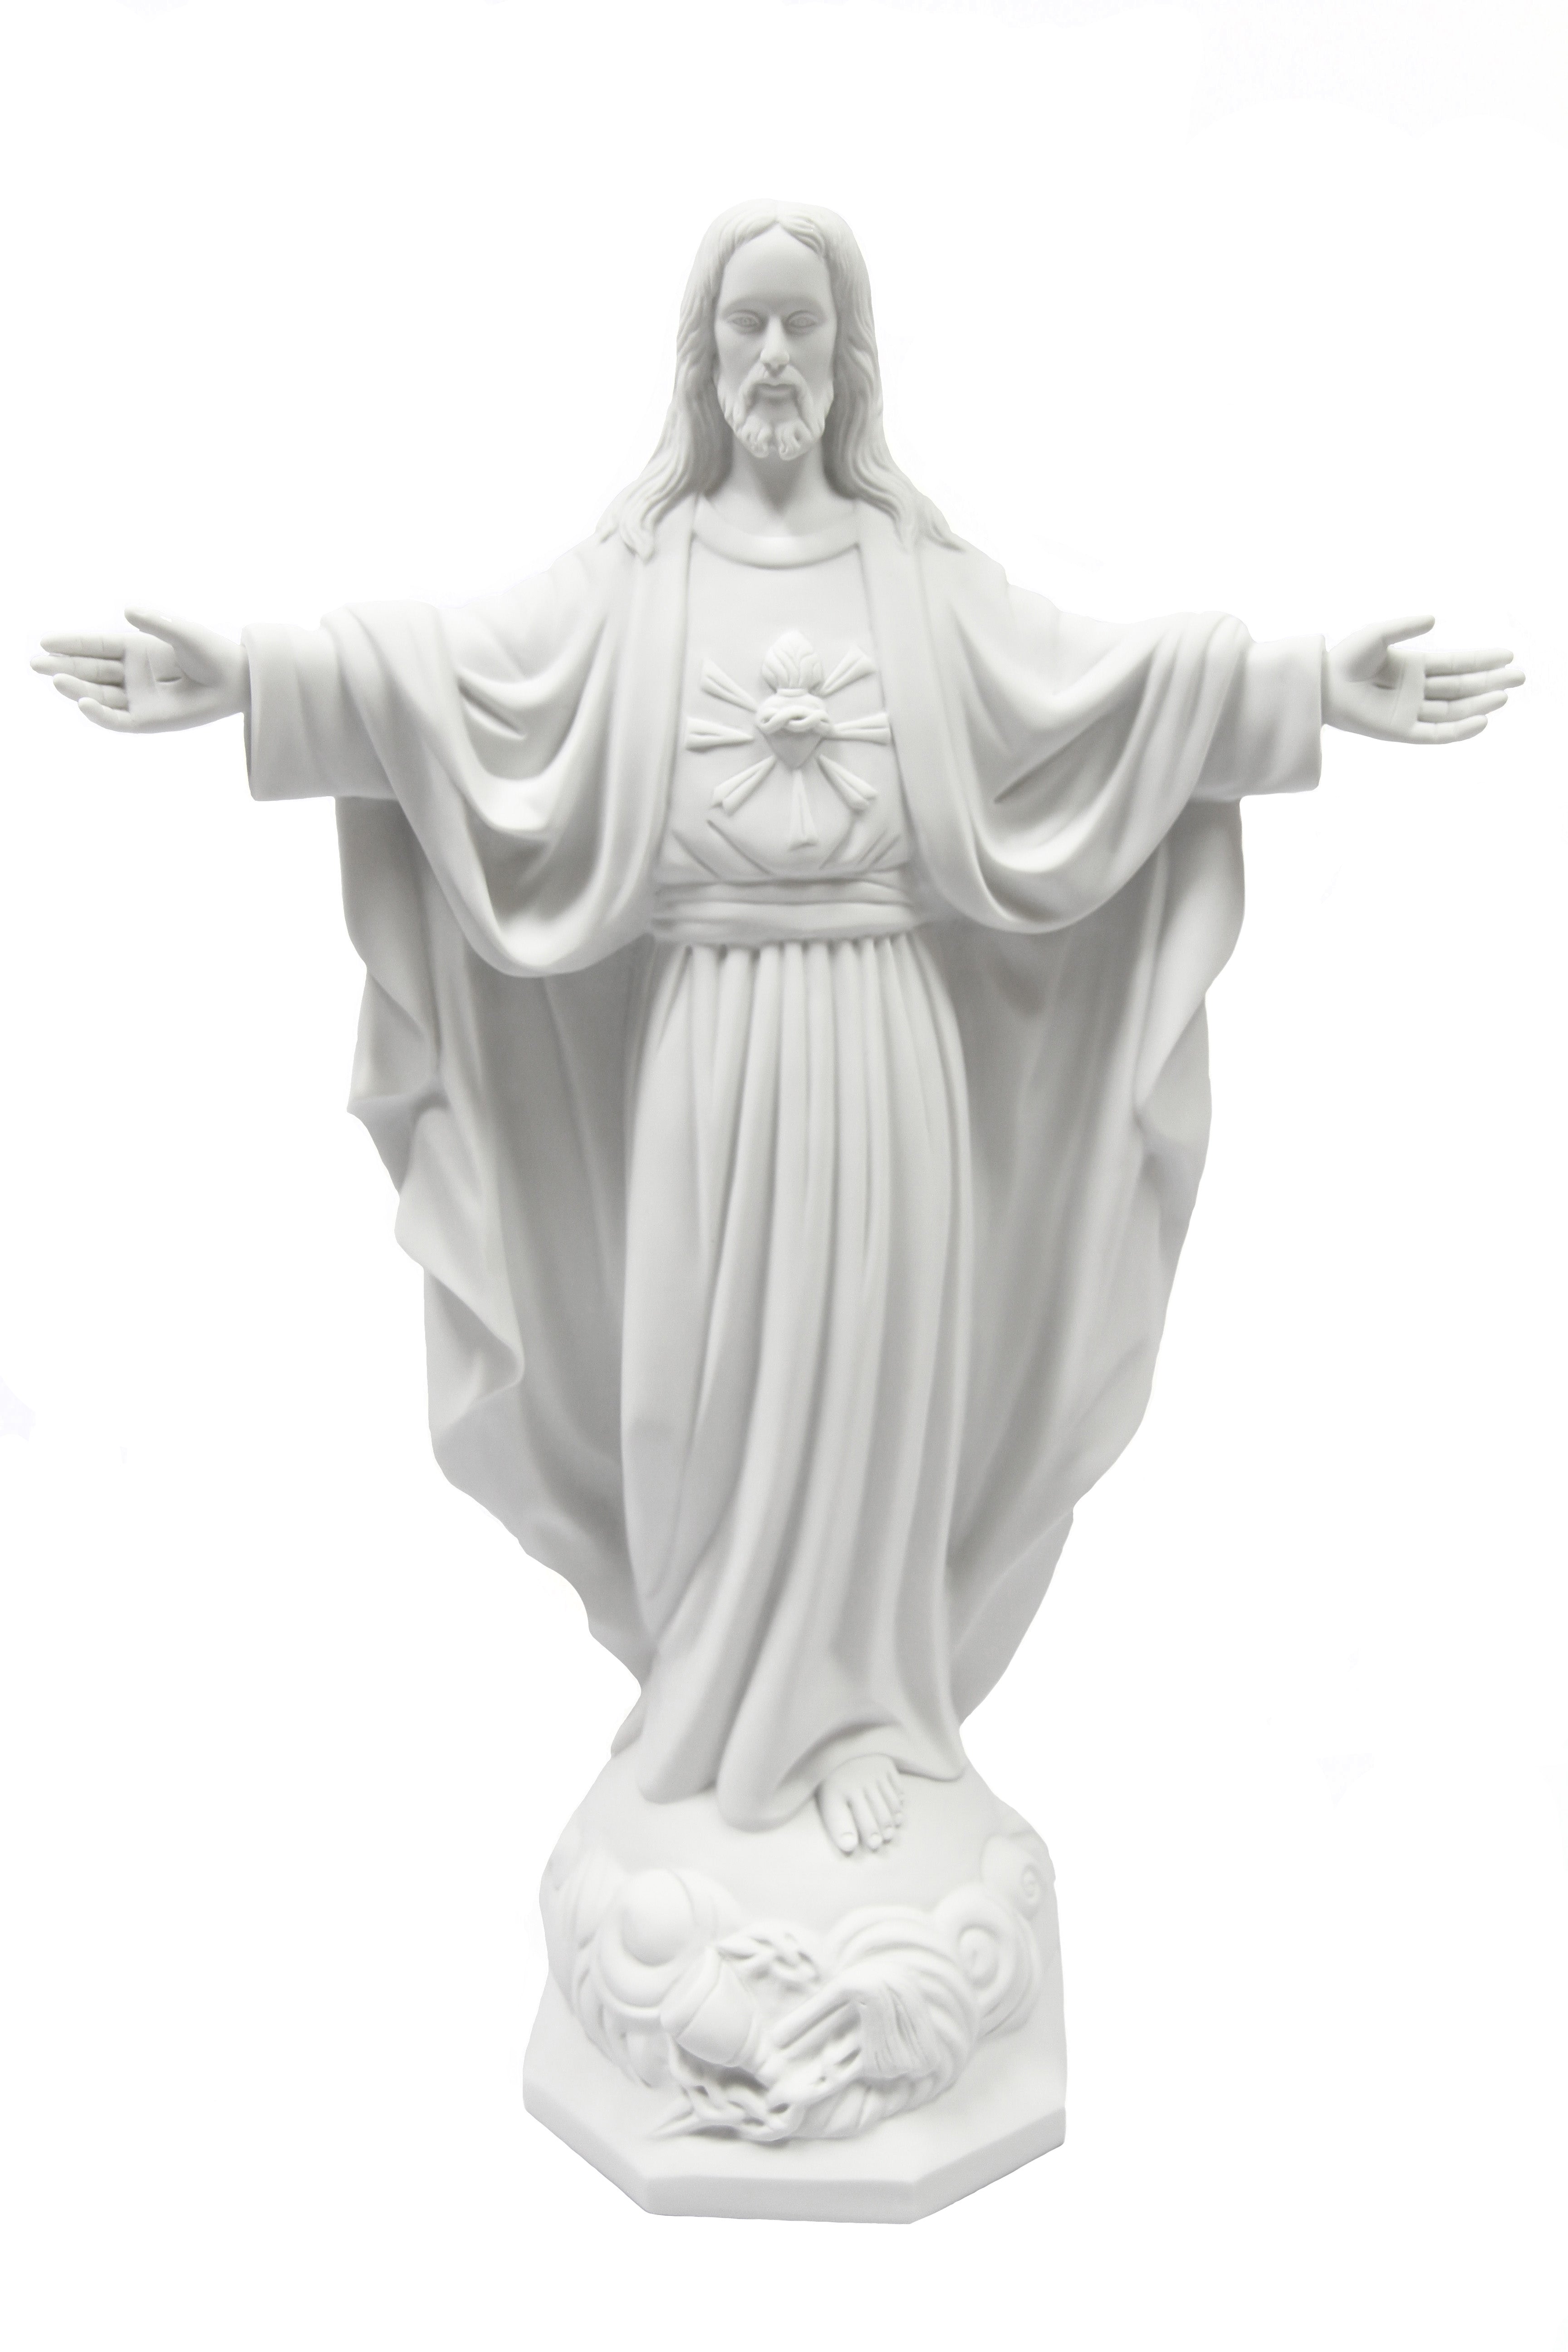 24 Inch Blessing Jesus Christ Catholic White Statue Figurine Vittoria Collection Made in Italy